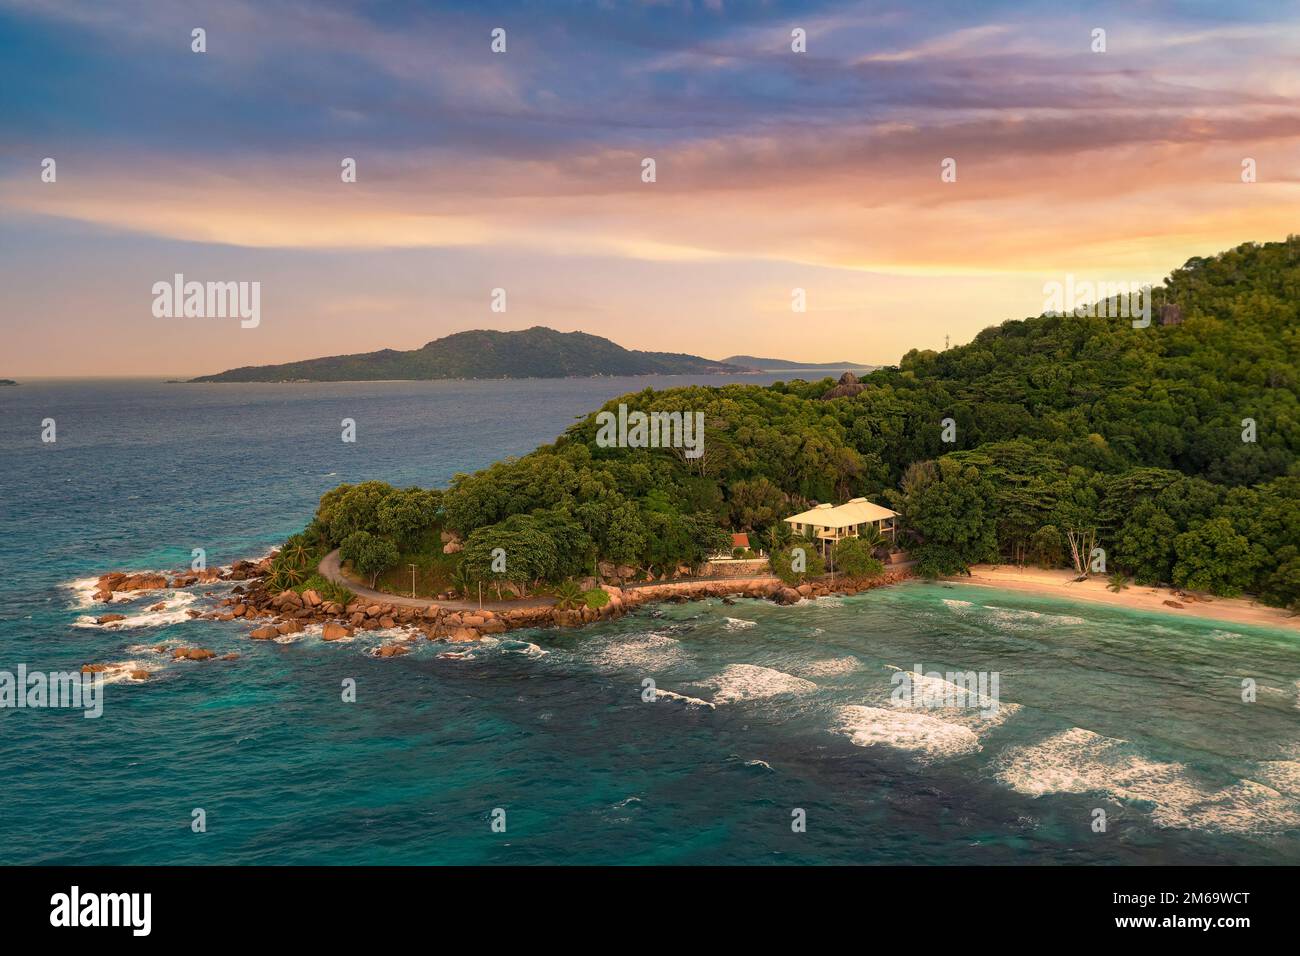 Aerial sunset view of Anse Severe Beach at the La Digue Island, Seychelles Stock Photo